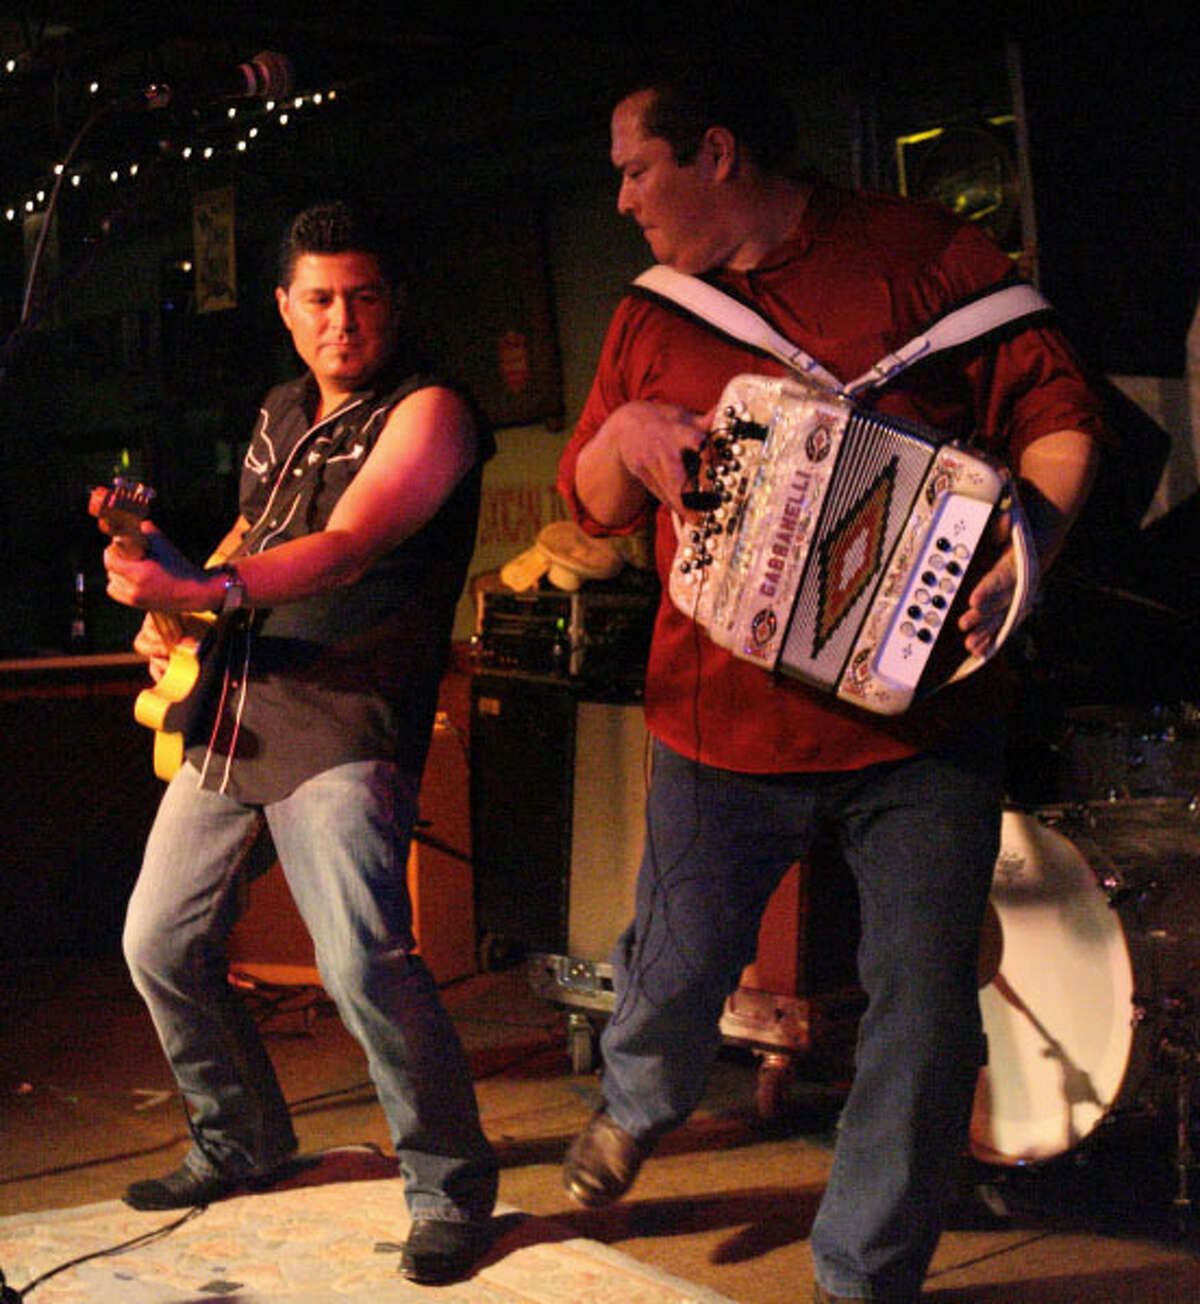 Guitarist Chris Zalez (left) and accordionist Dave Perez both front the Tejas Brothers, who blend Texas roots rock, blues, country and Tex-Mex in the vein of the Texas Tornados.